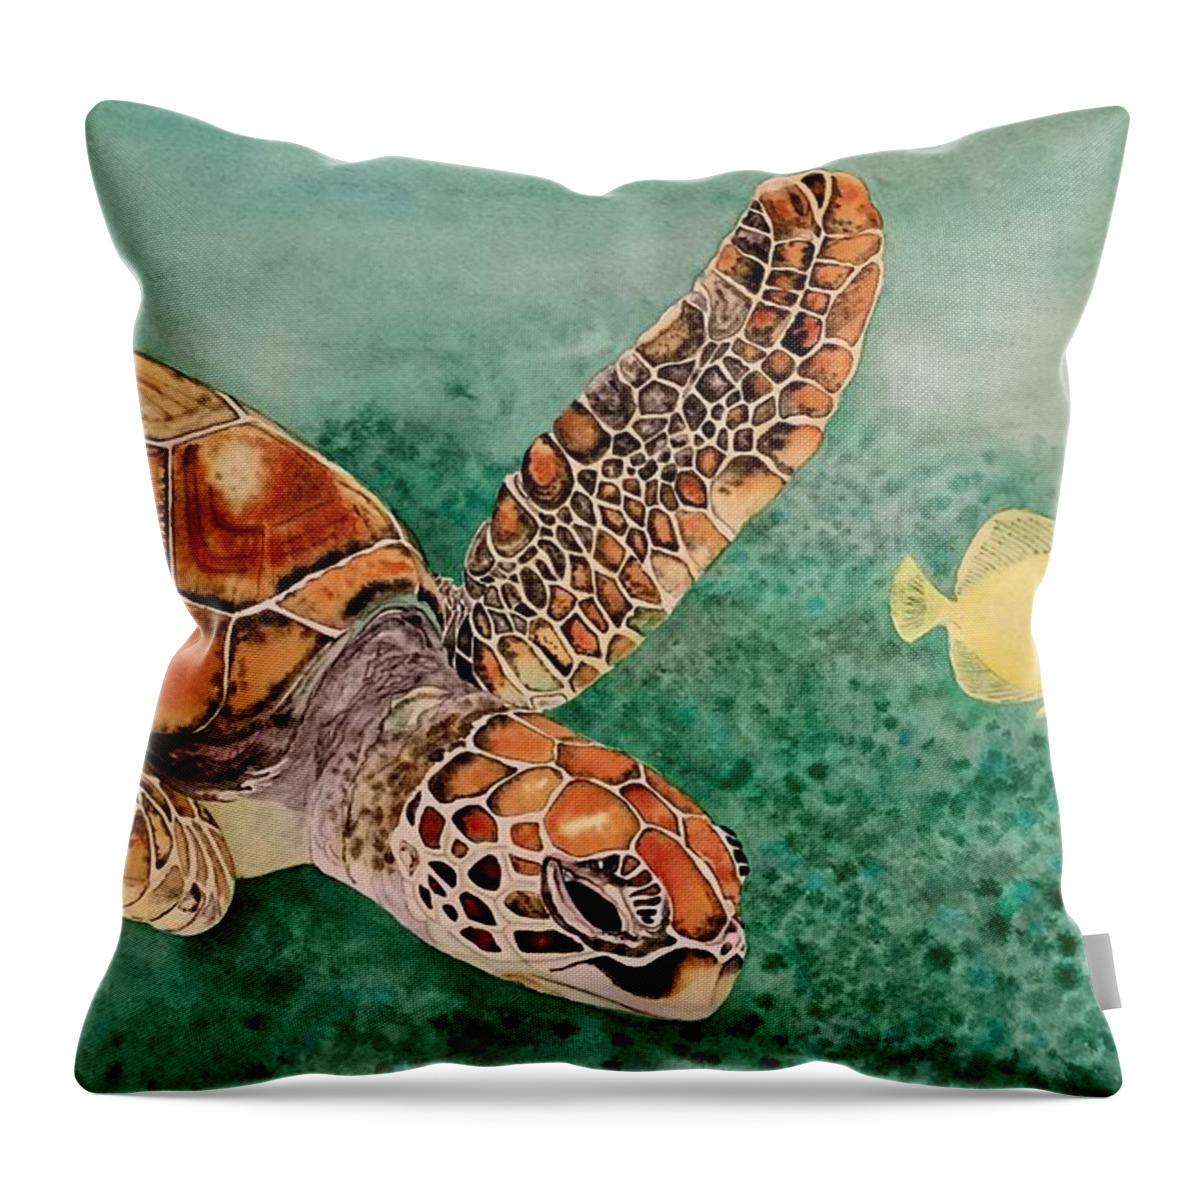 Sea Turtle Throw Pillow featuring the painting Tanging Around by Sonja Jones